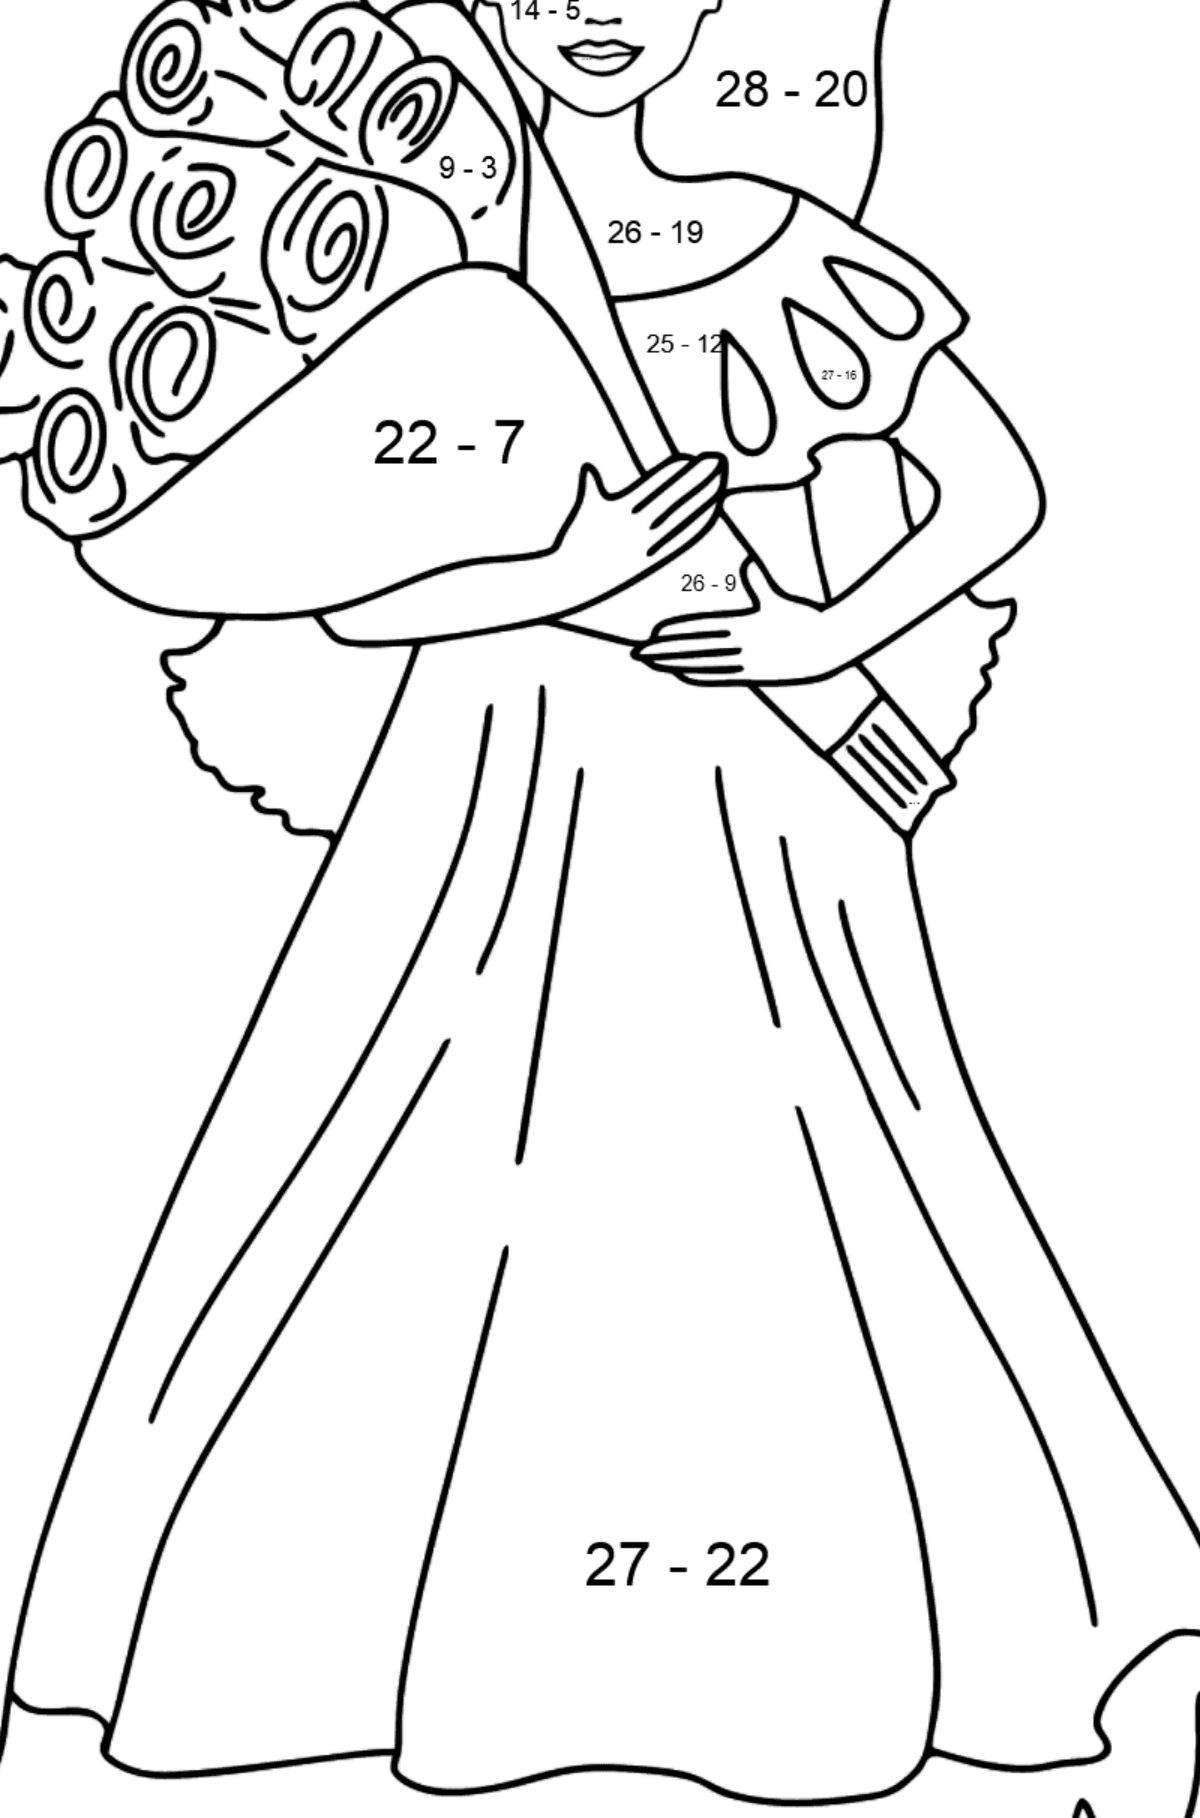 Barbie Doll and a Bouquet of Roses coloring page - Math Coloring - Subtraction for Kids